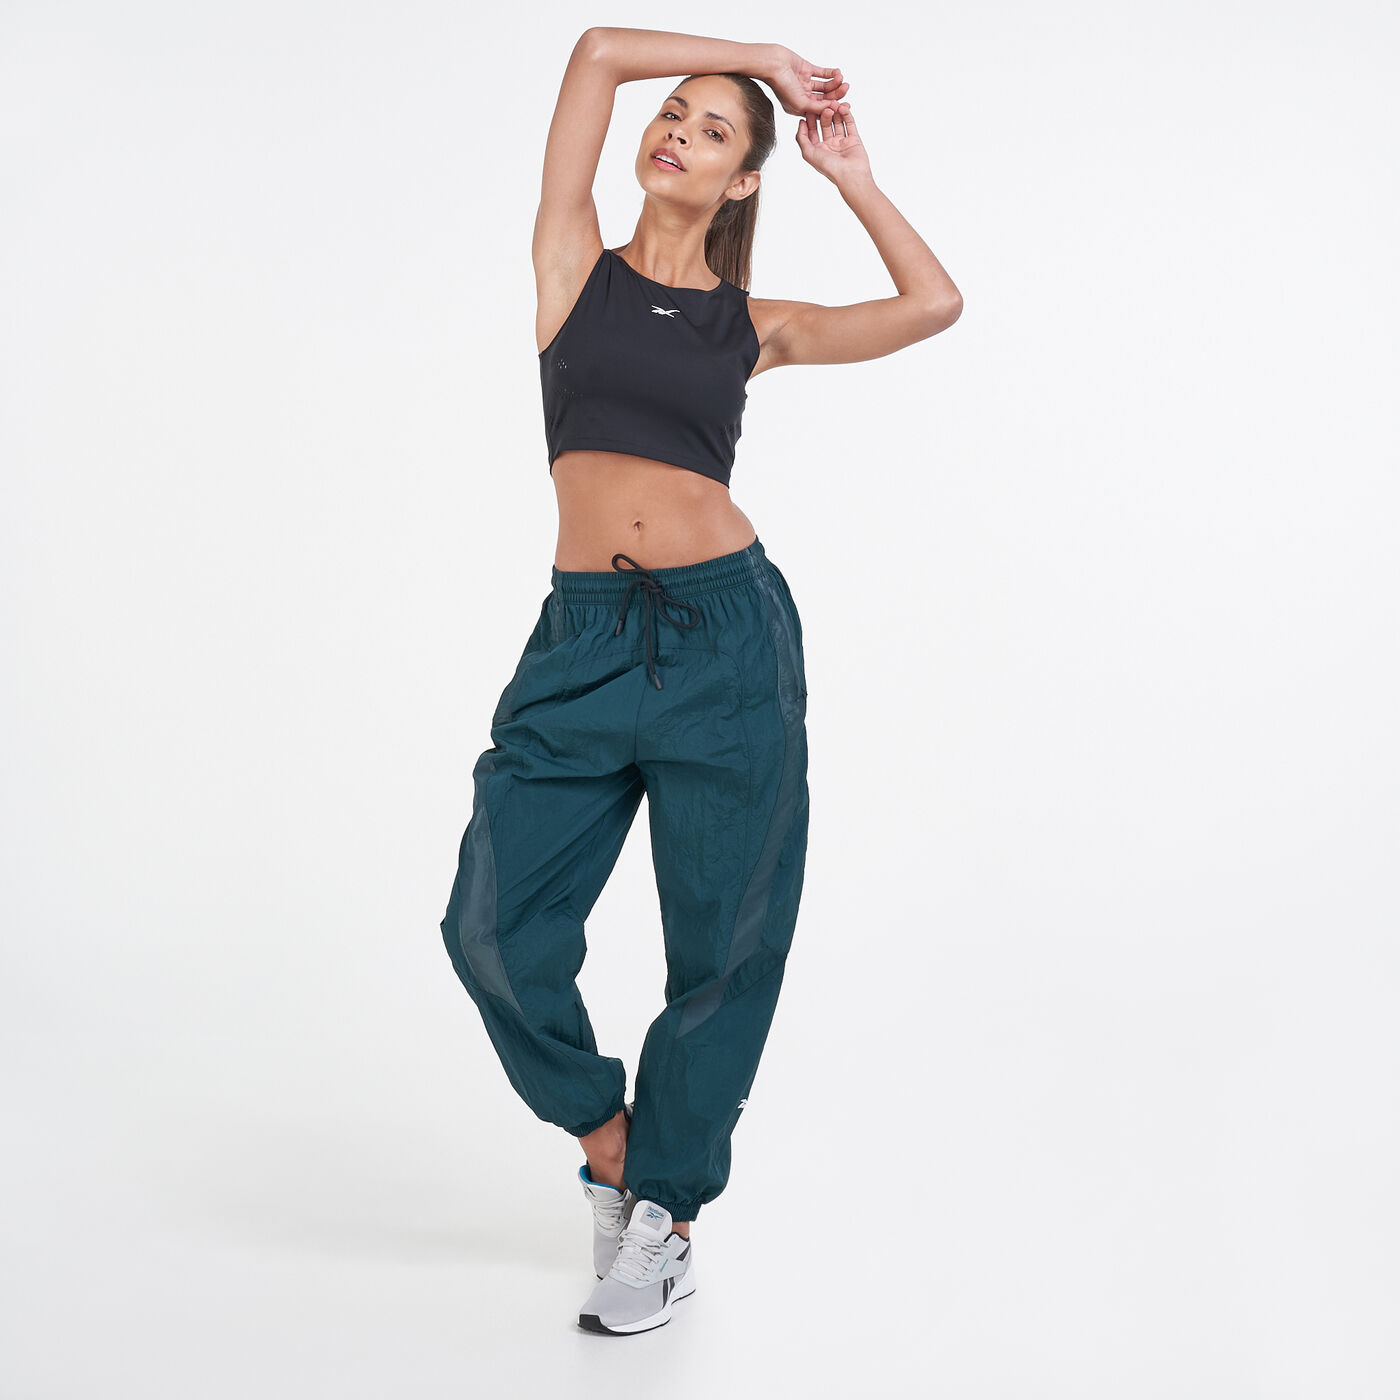 Women's Perform Perforated Crop Top